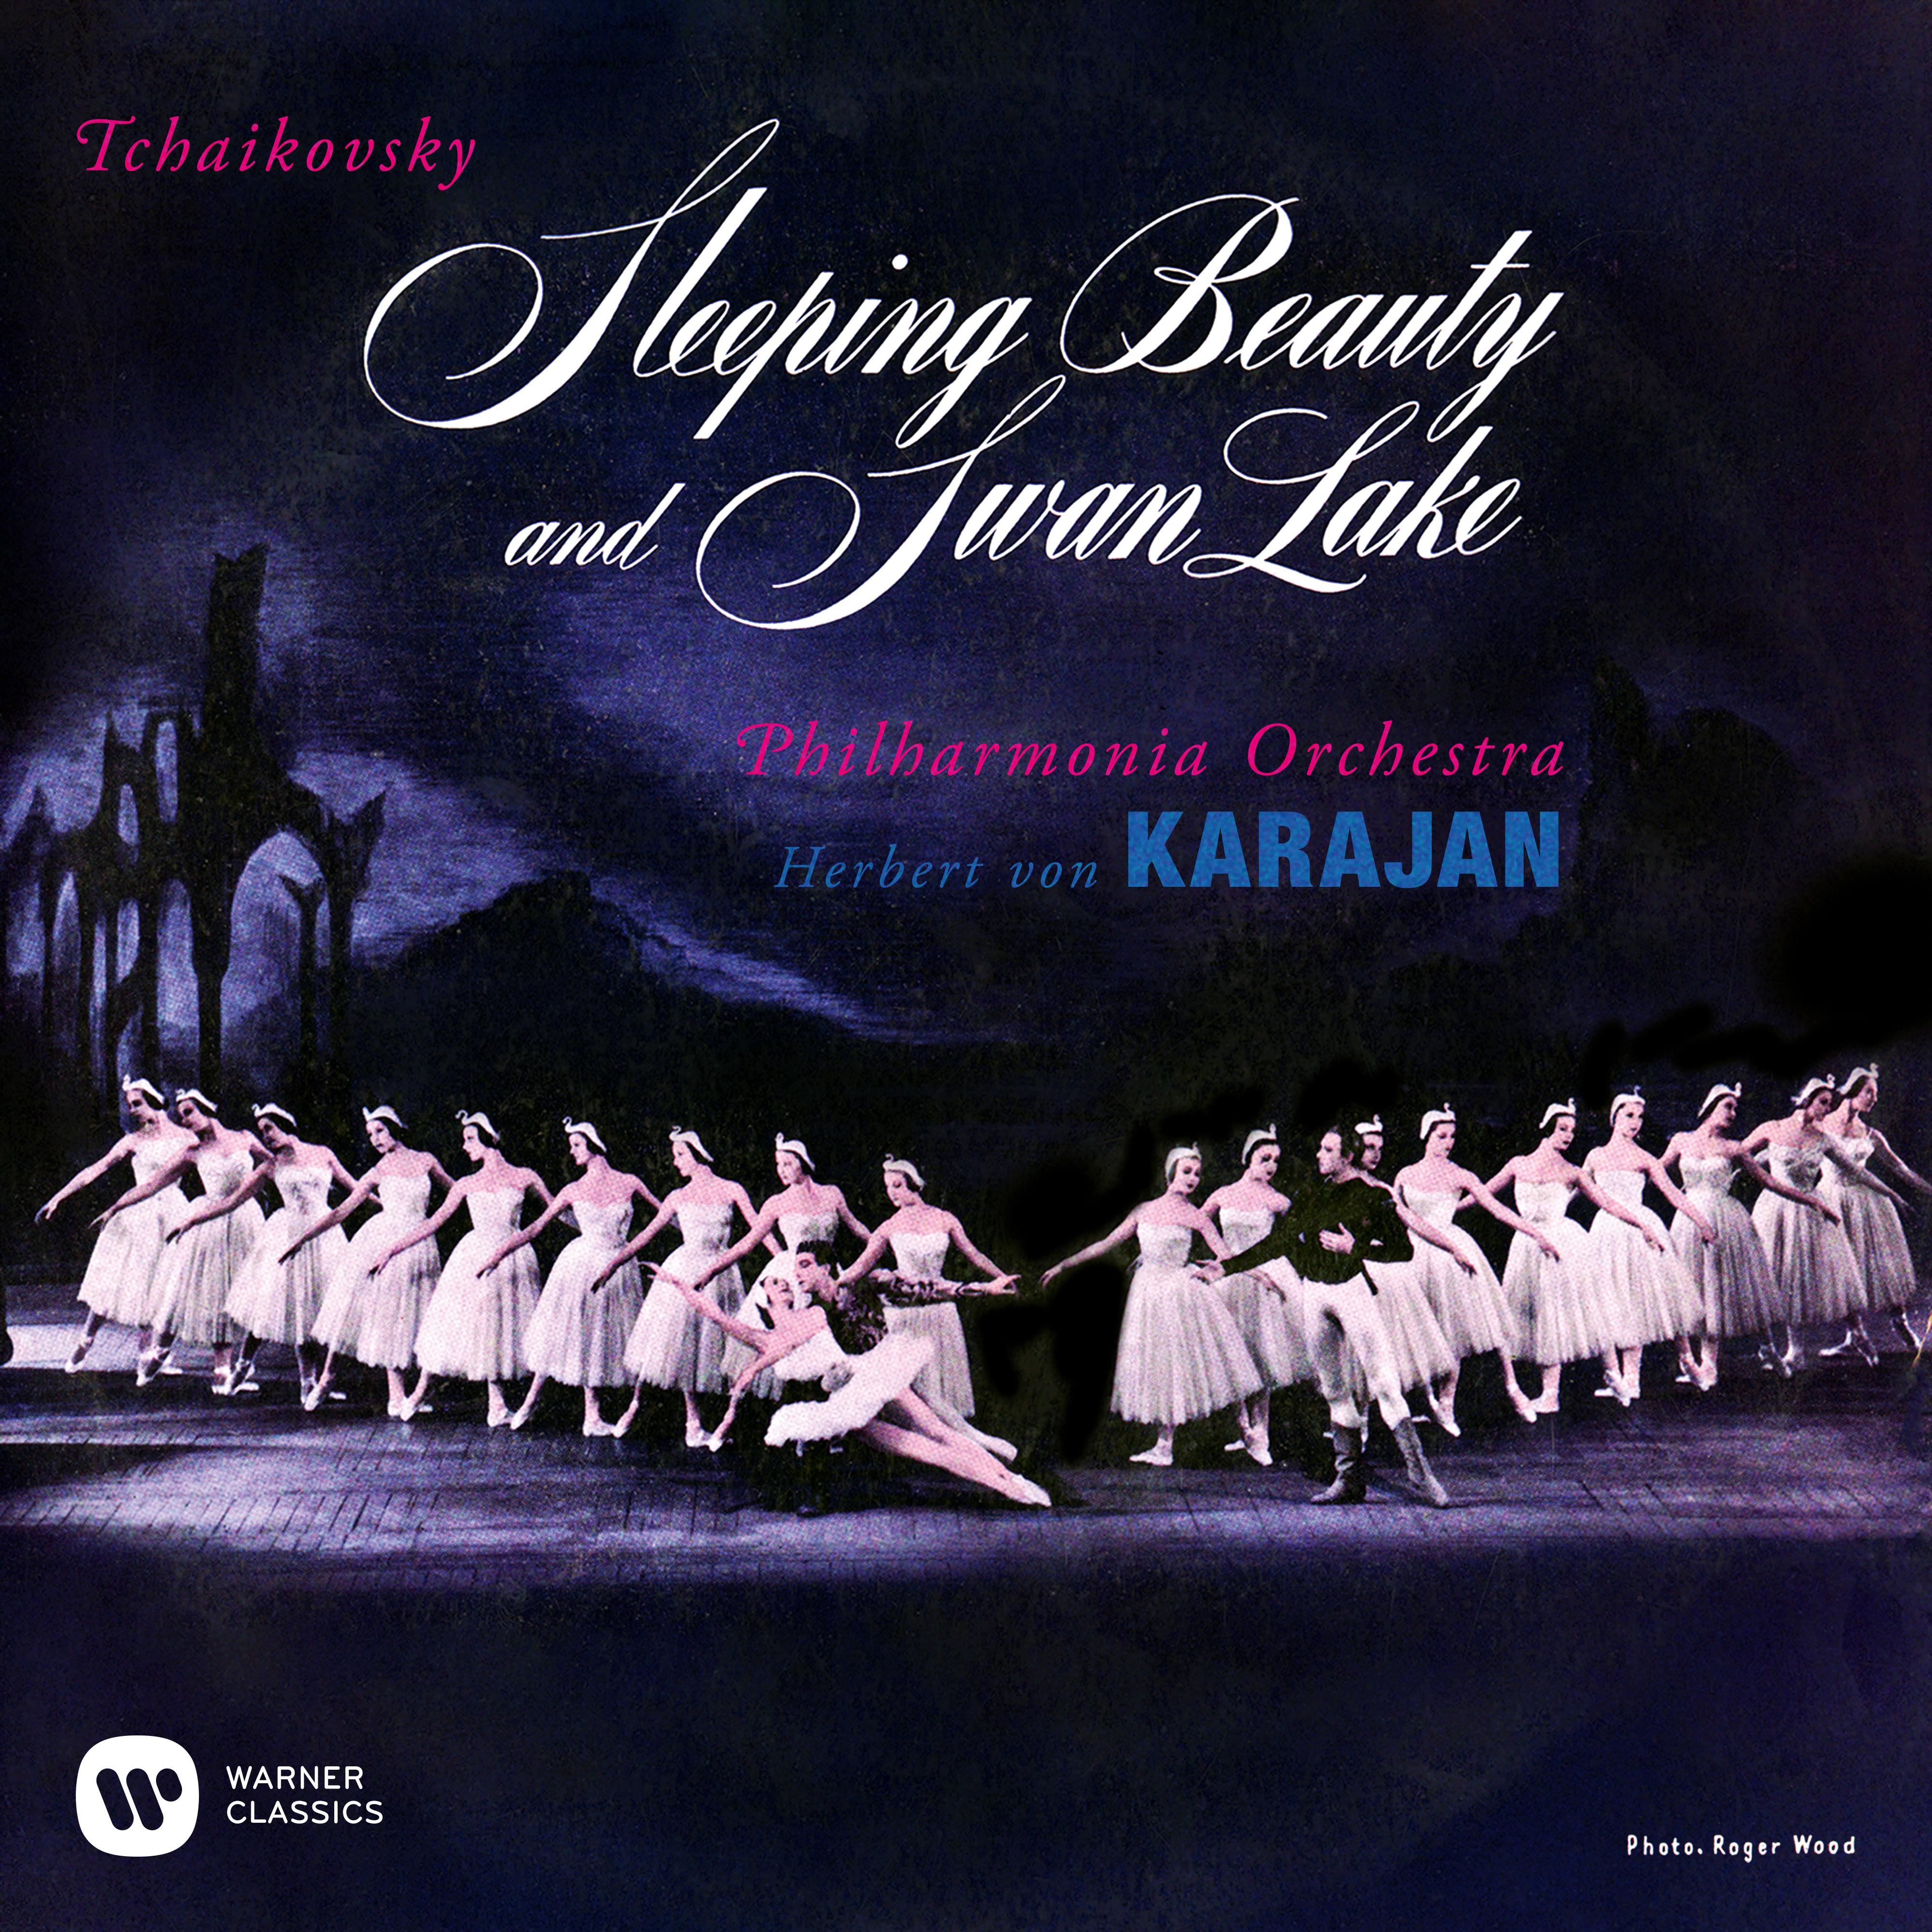 Suite from The Sleeping Beauty, Op. 66a: IV. Panorama